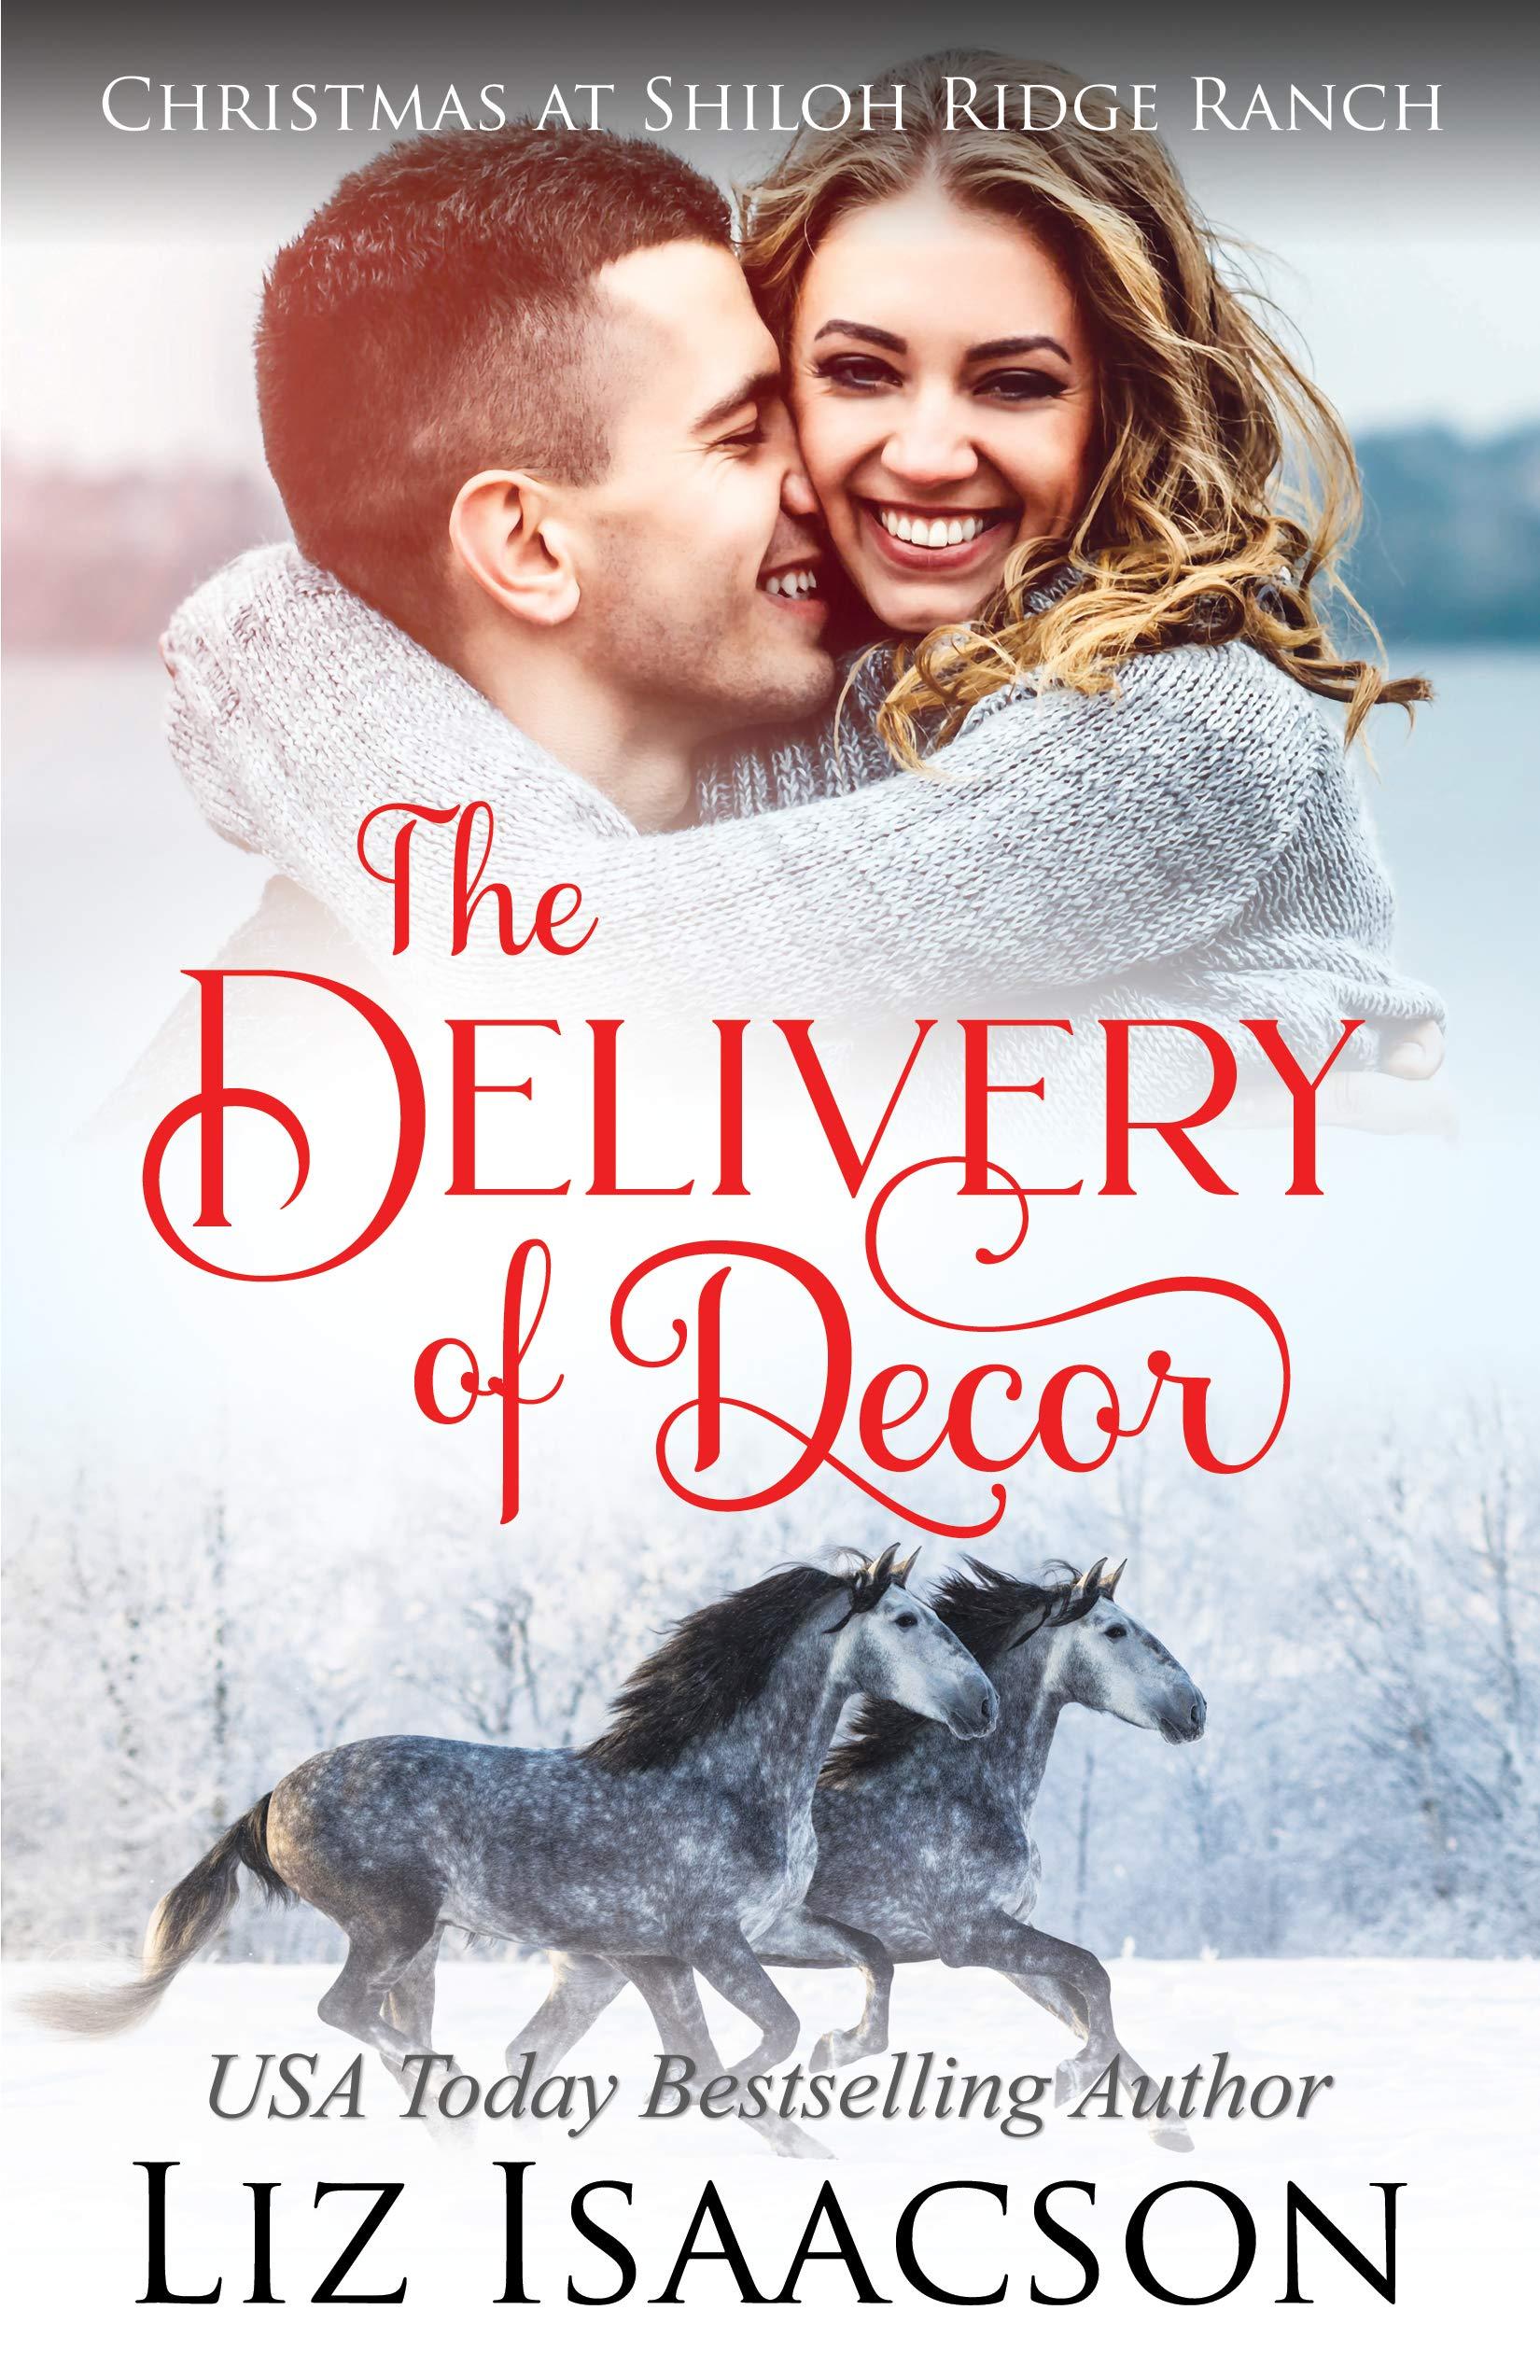 The Delivery of Decor